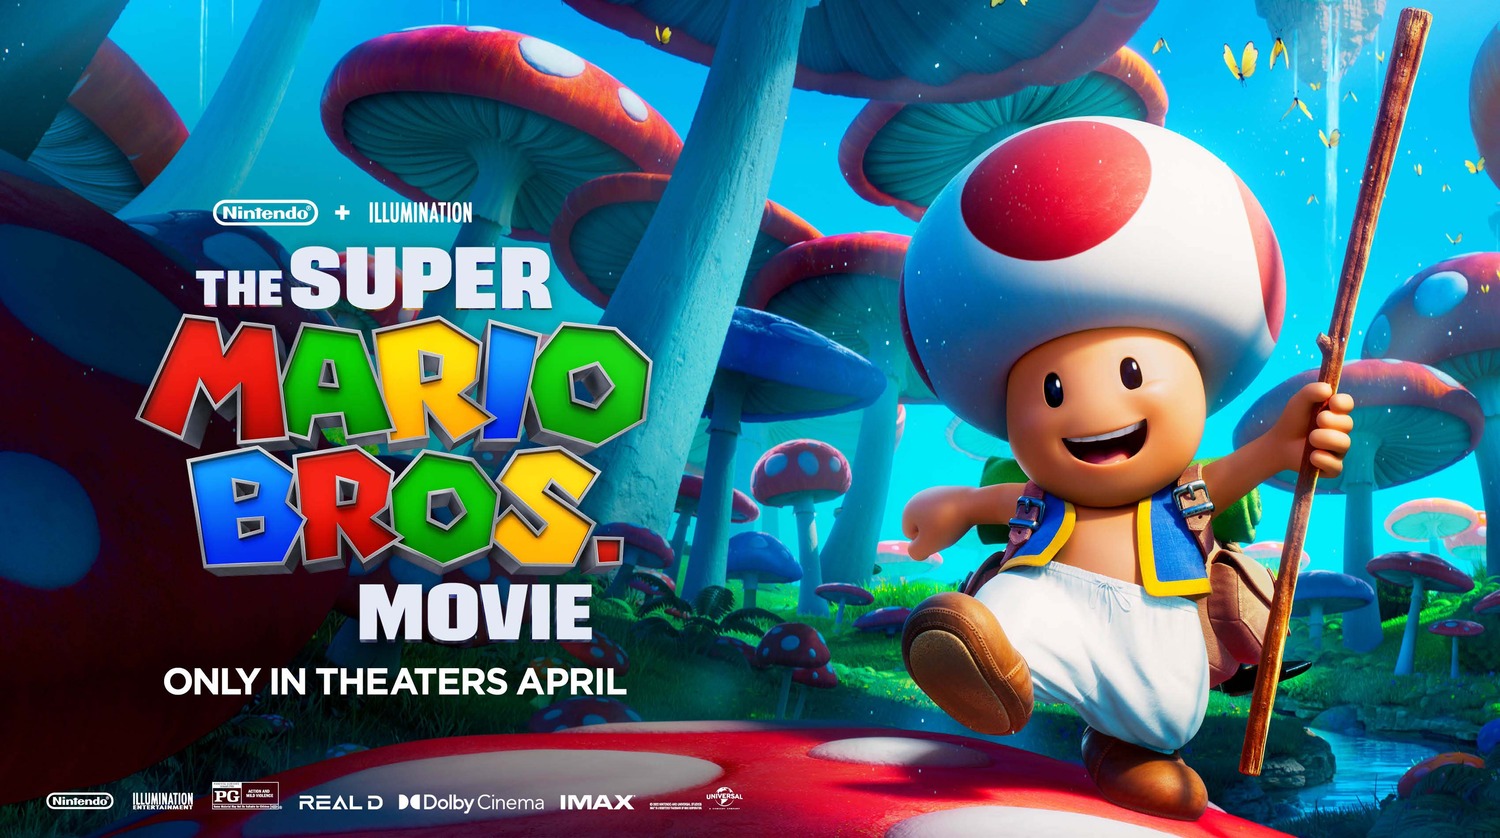 The Super Mario Bros. Movie tops the weekend box office